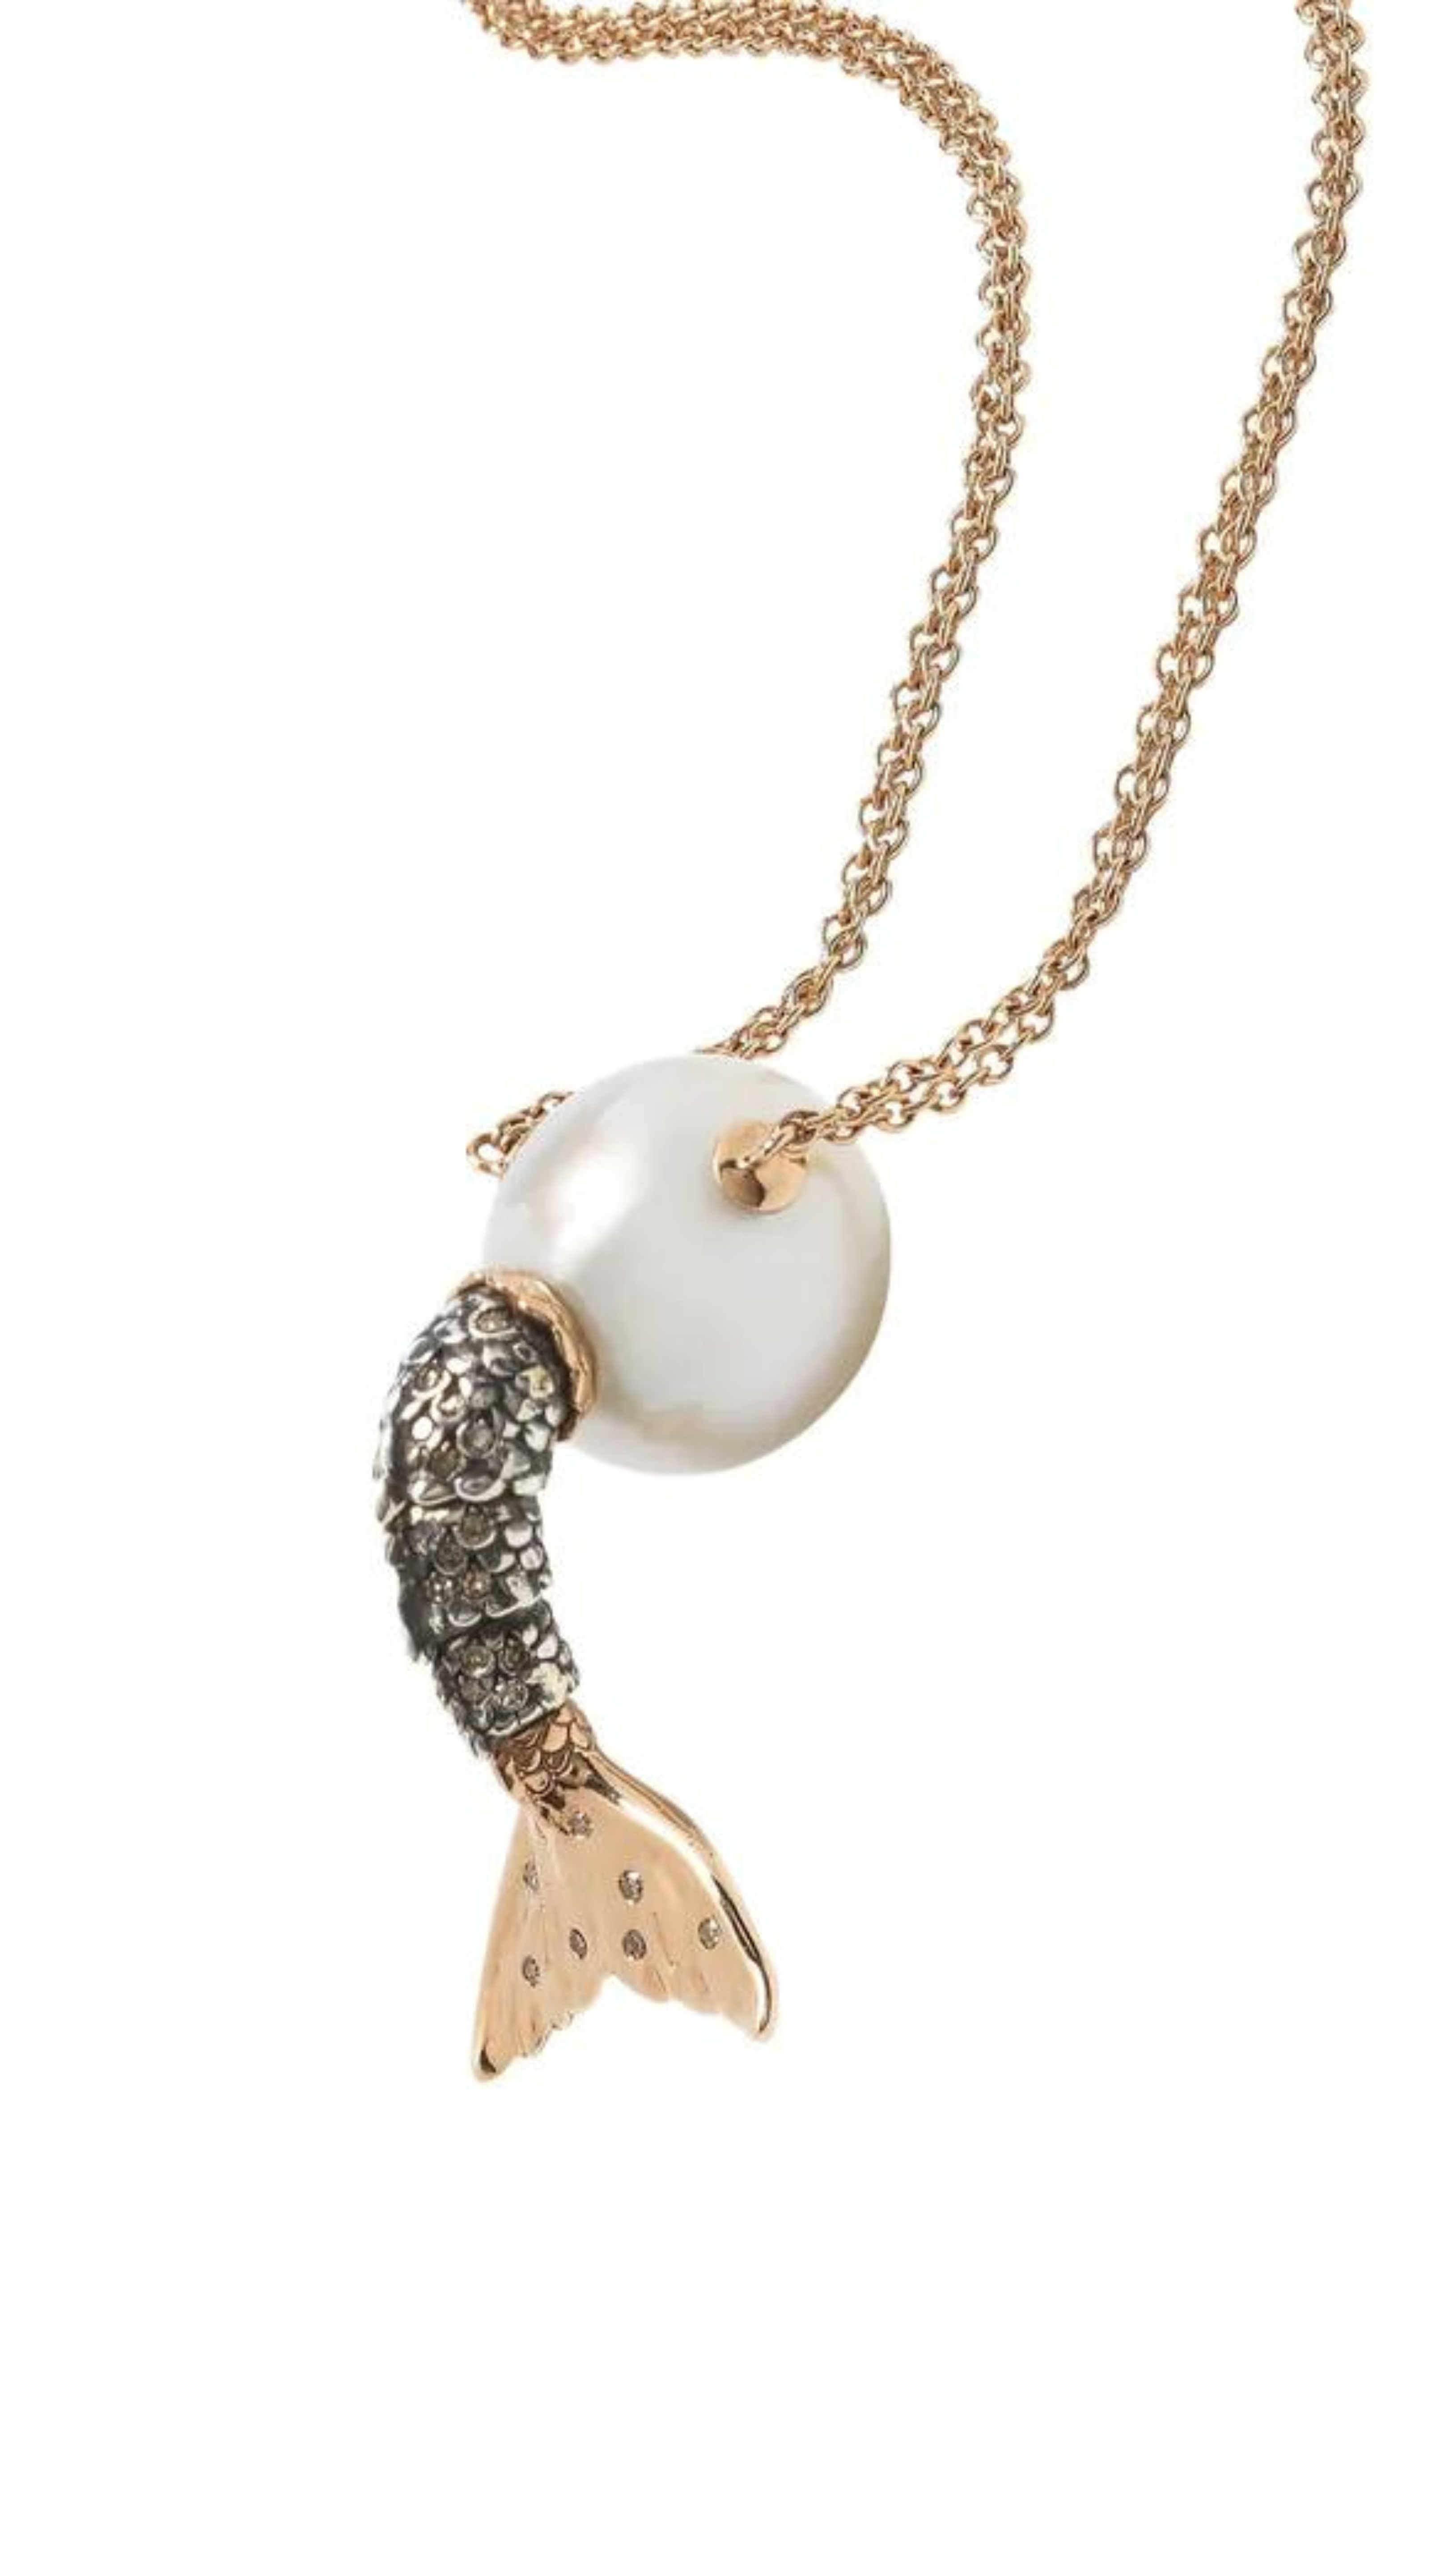 Bibi van der Velden The Mermaid Pearl Necklace. Crafted in 18K rose gold and sterling silver, embellished with white diamonds. The scales on the tail move, while the tail emerges from a luminous pearl and sits on an 18K rose gold chain.